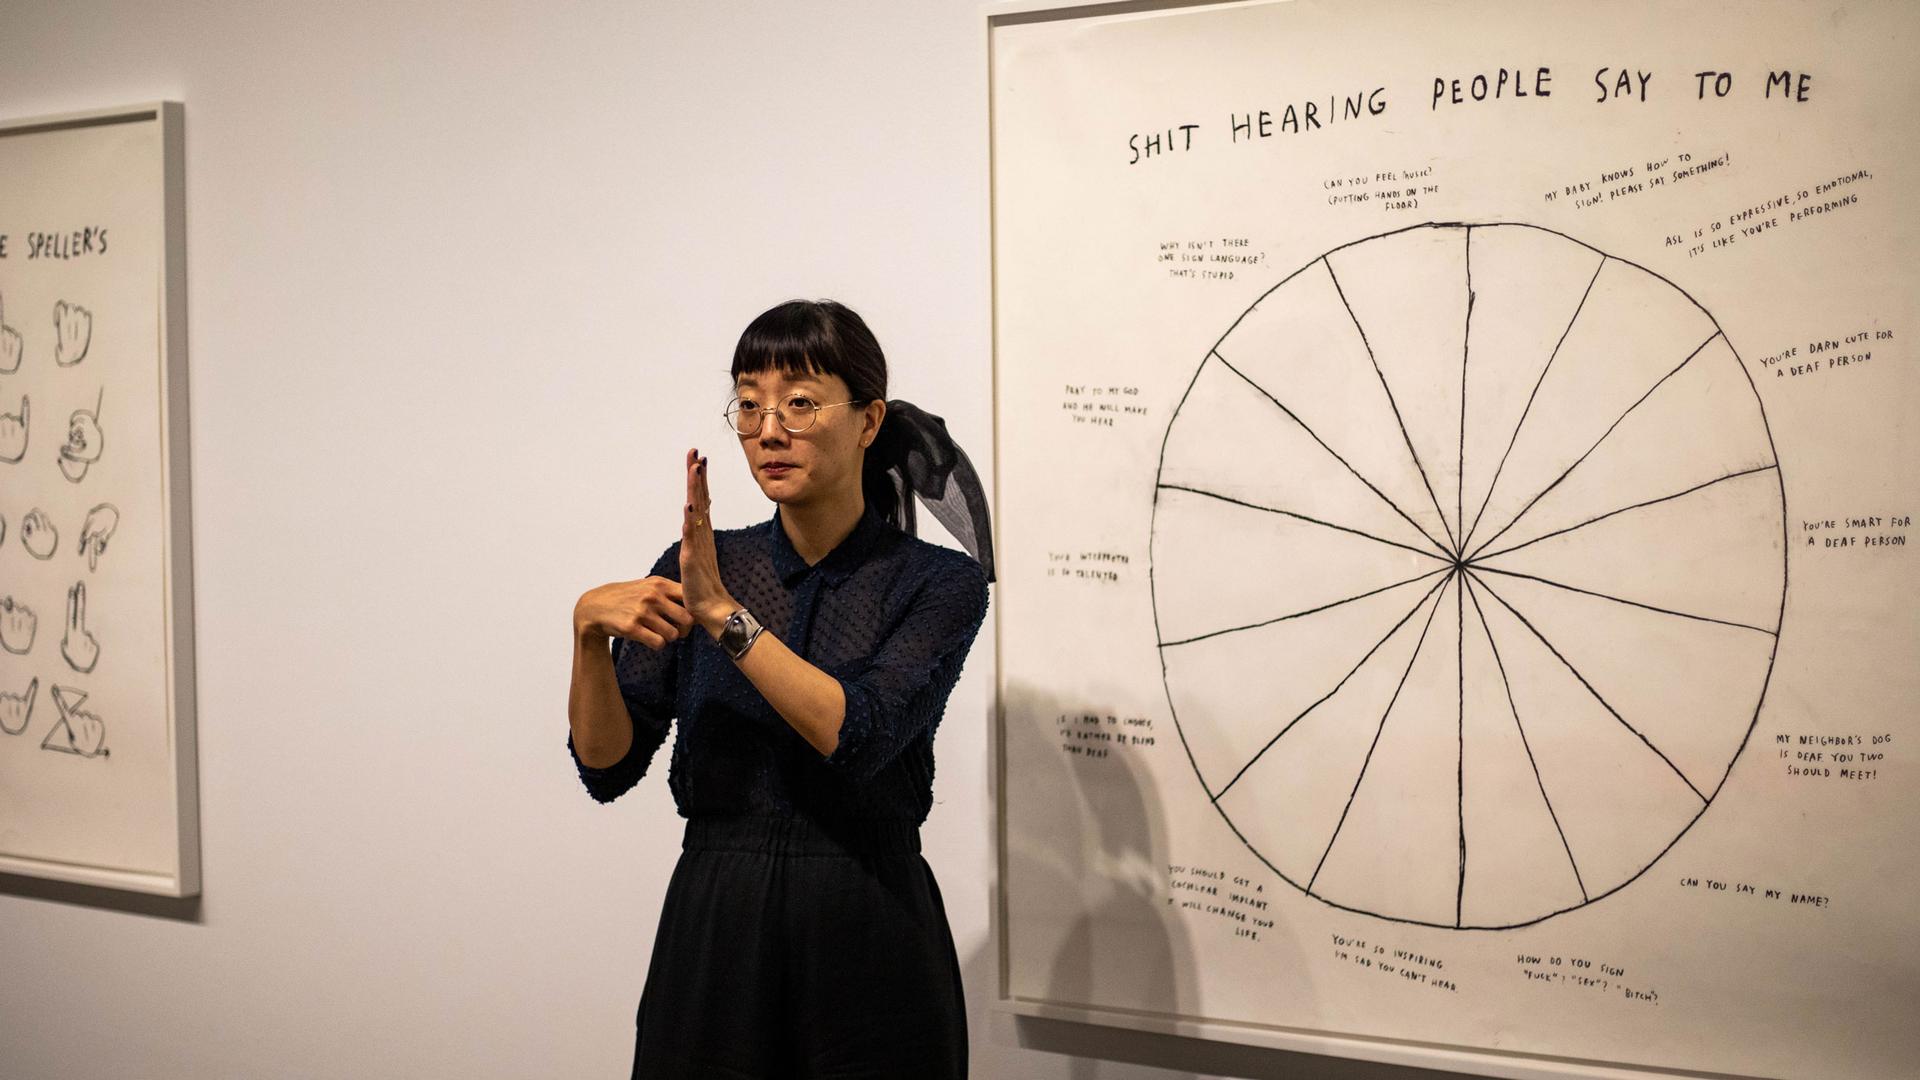 Christine Sun Kim is shown signing and standing in front of her art featuring a pie chart titled "Shit Hearing People Say To Me."